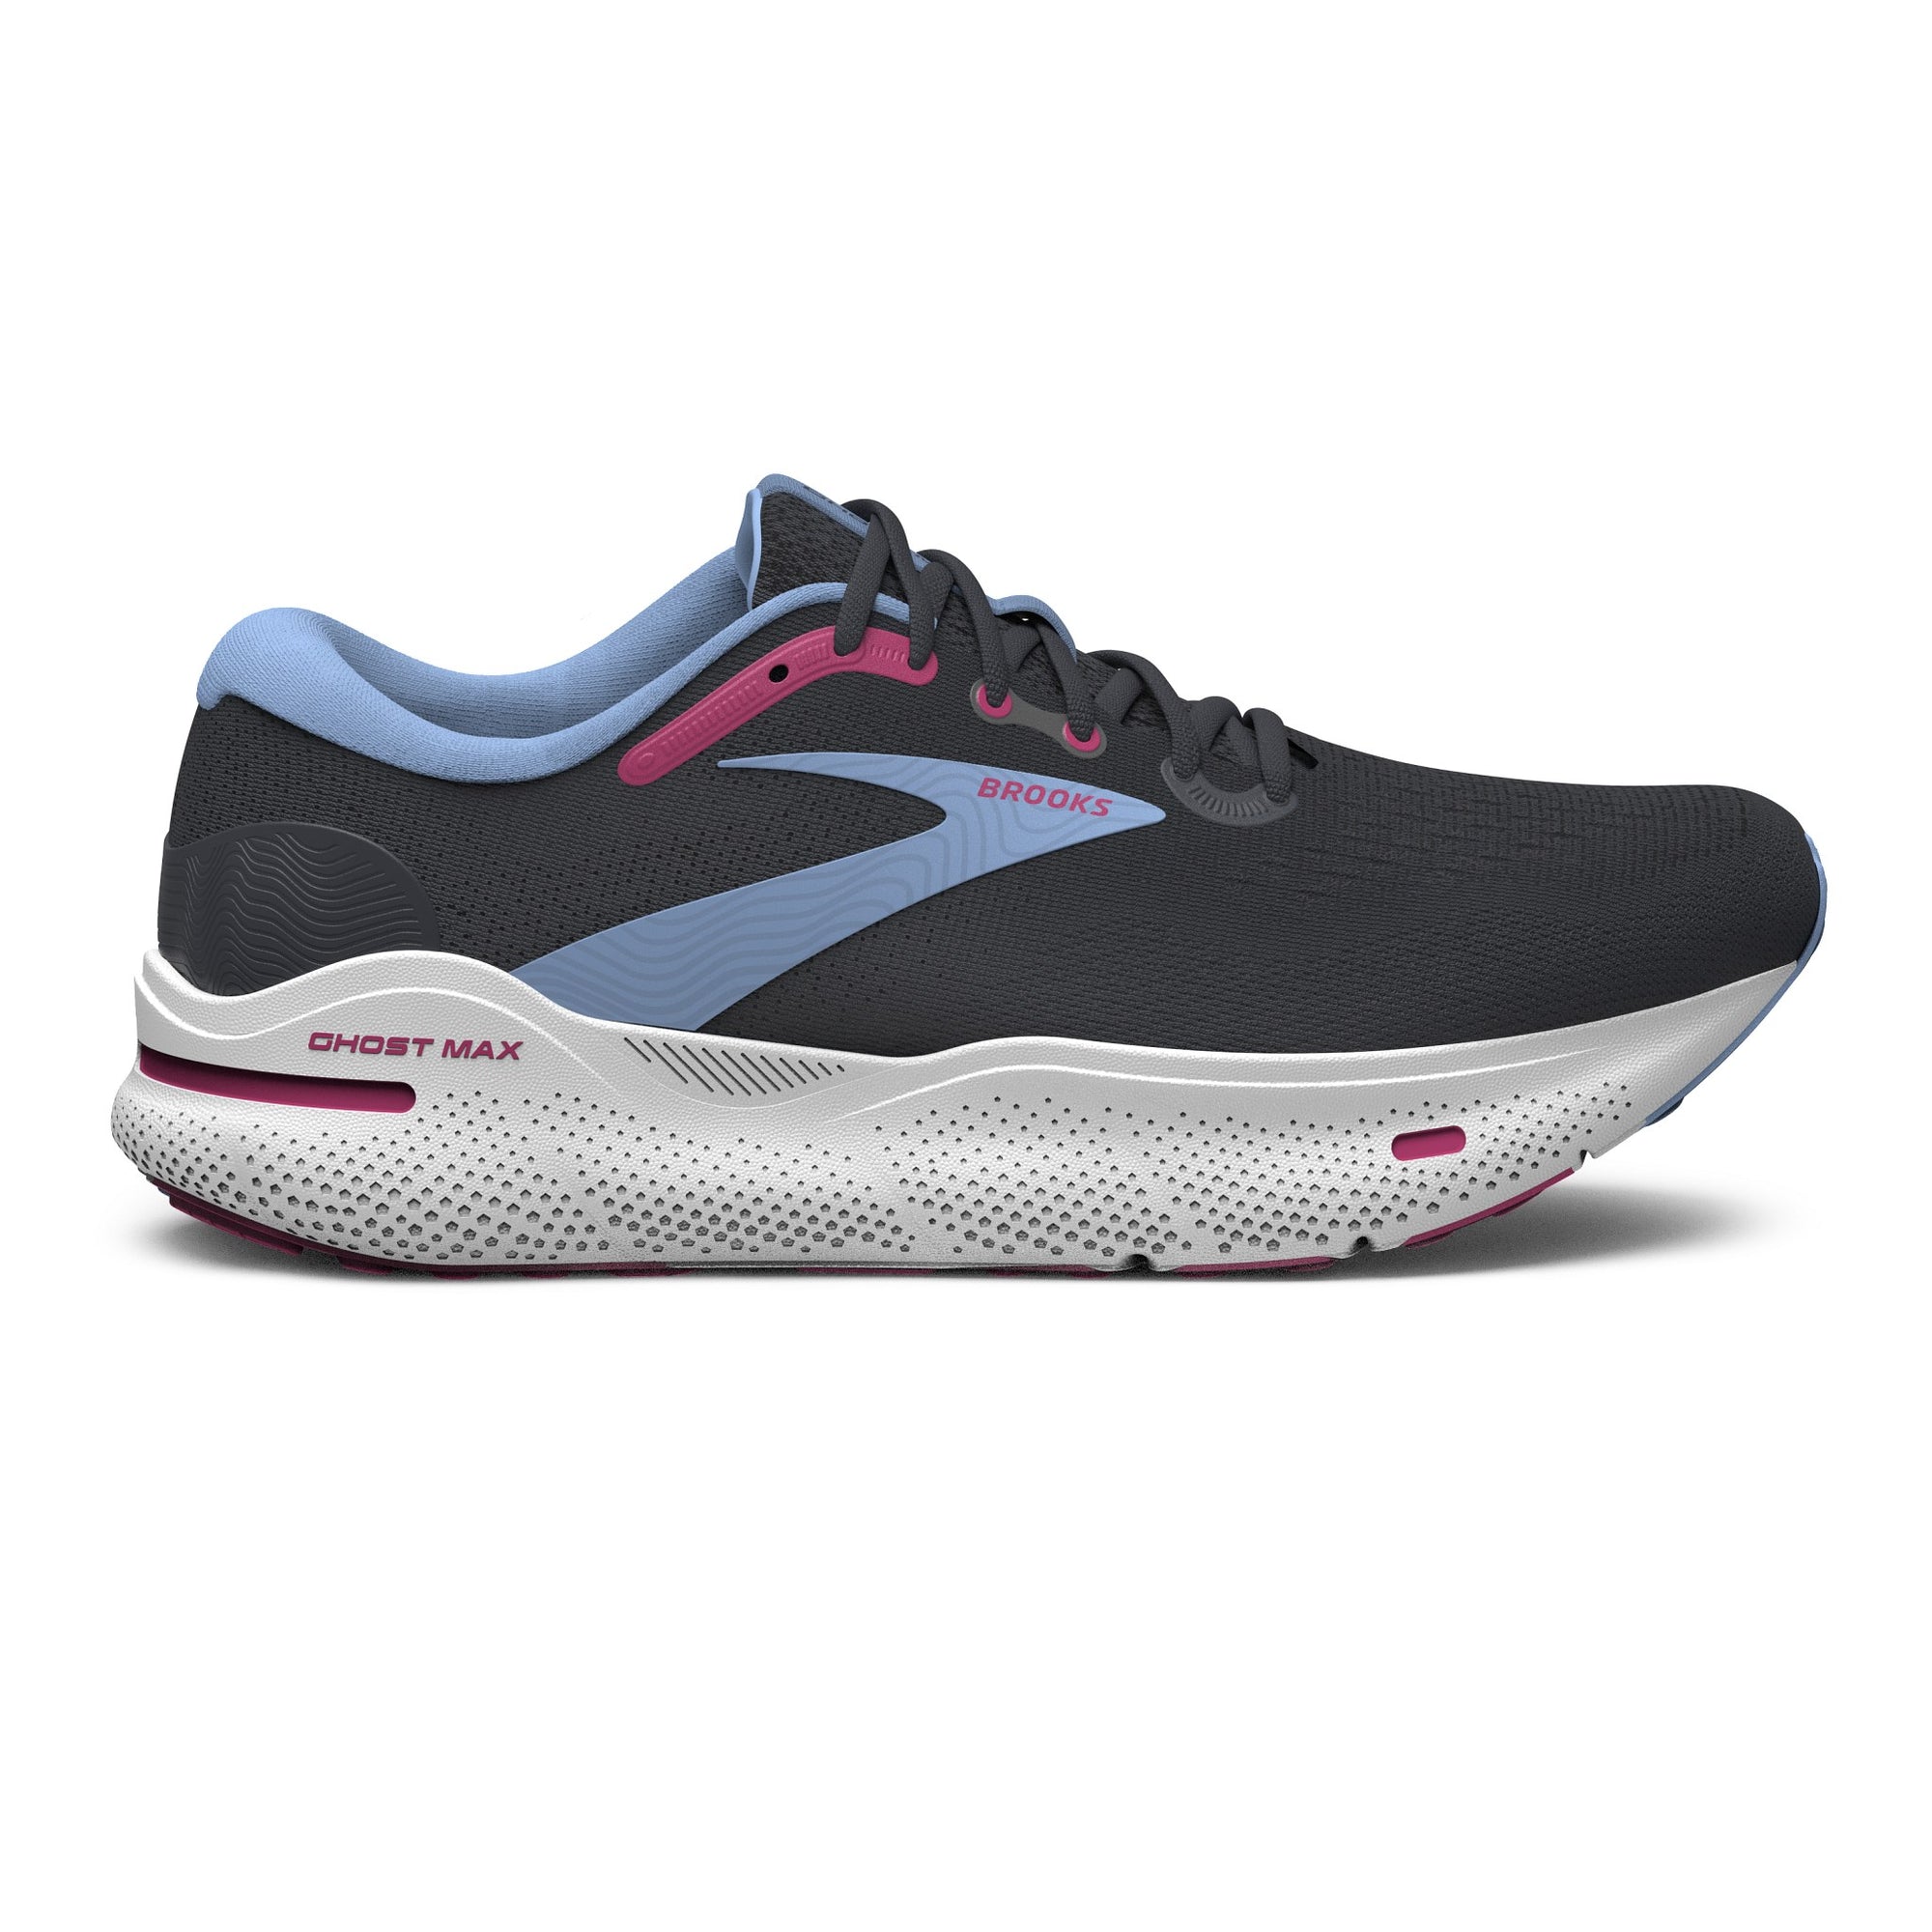 A single Brooks Ghost Max running shoe, featuring a black upper with blue and pink accents, a white sole, and DNA Loft v2 foam.